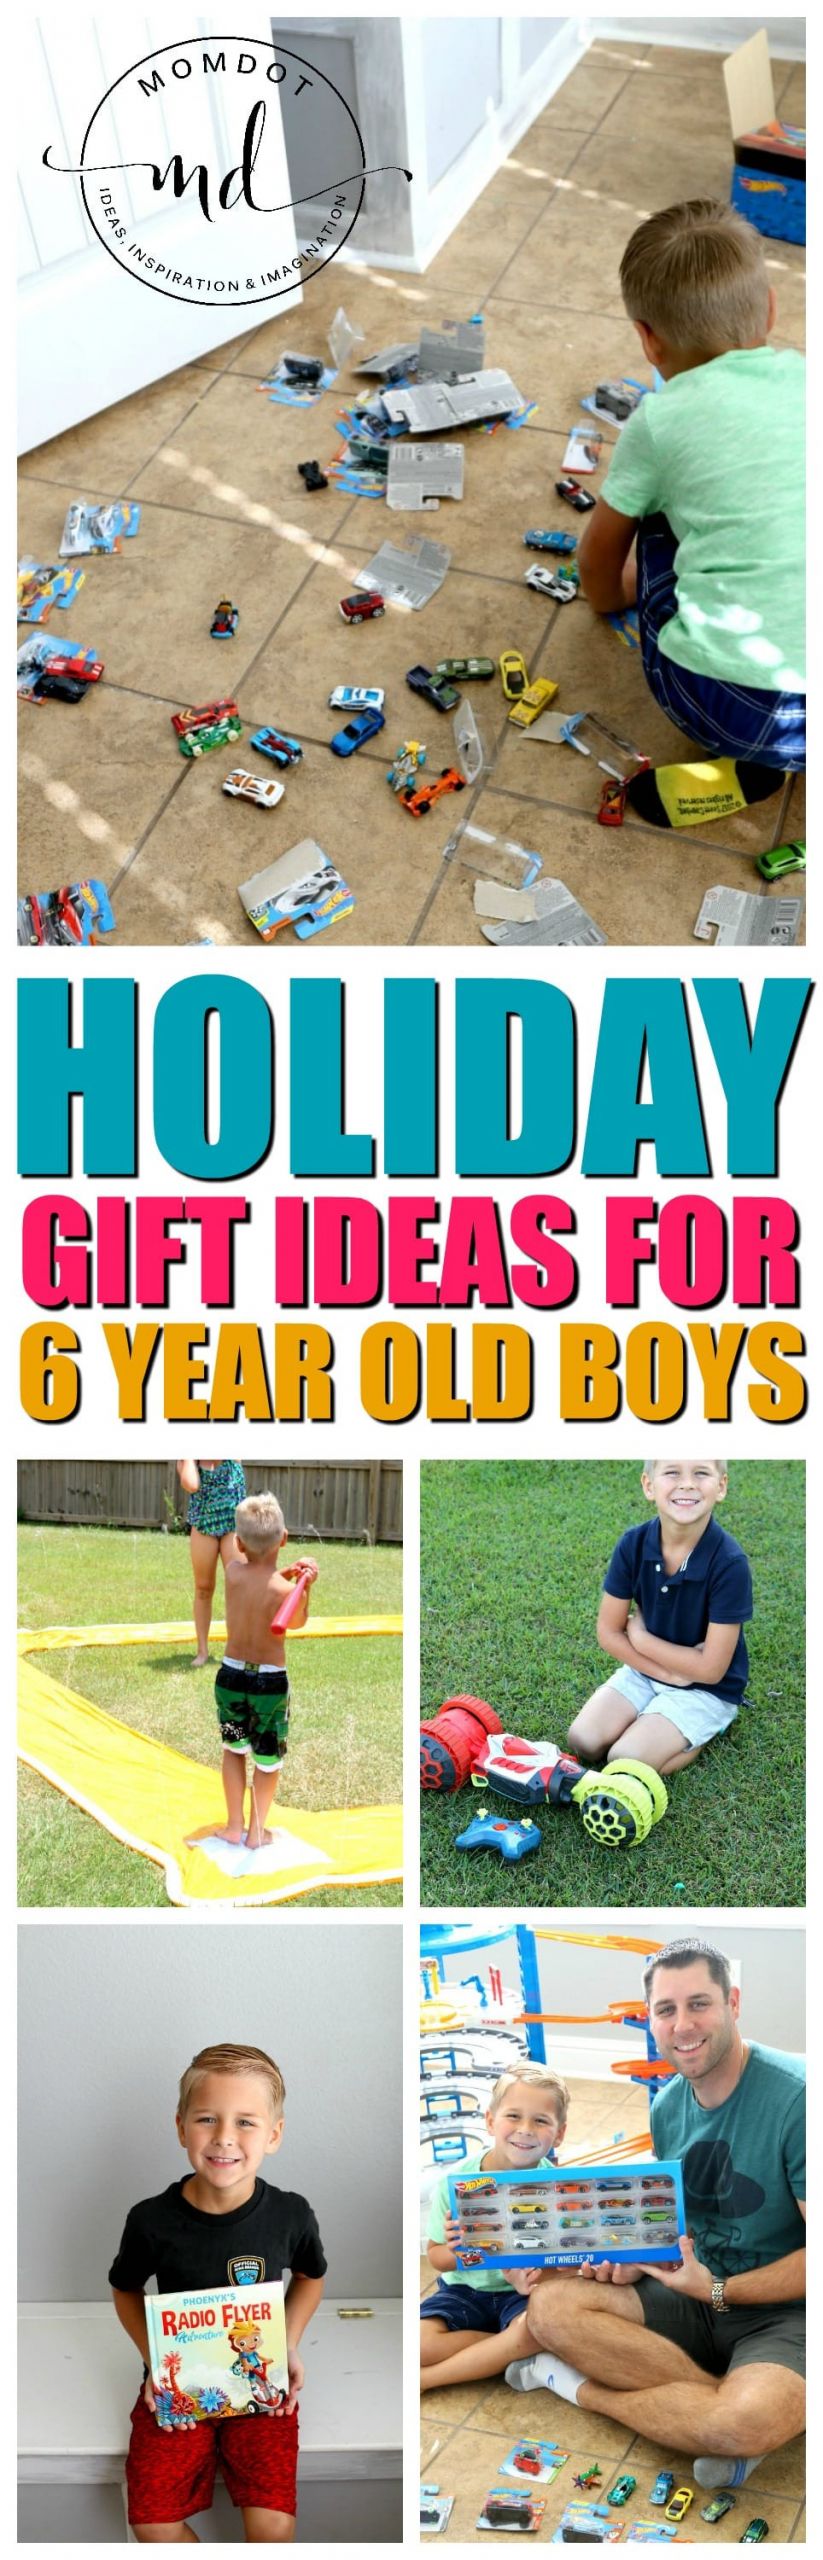 Boys Gift Ideas Age 6
 Gift Ideas for 6 year old boys from creative play to